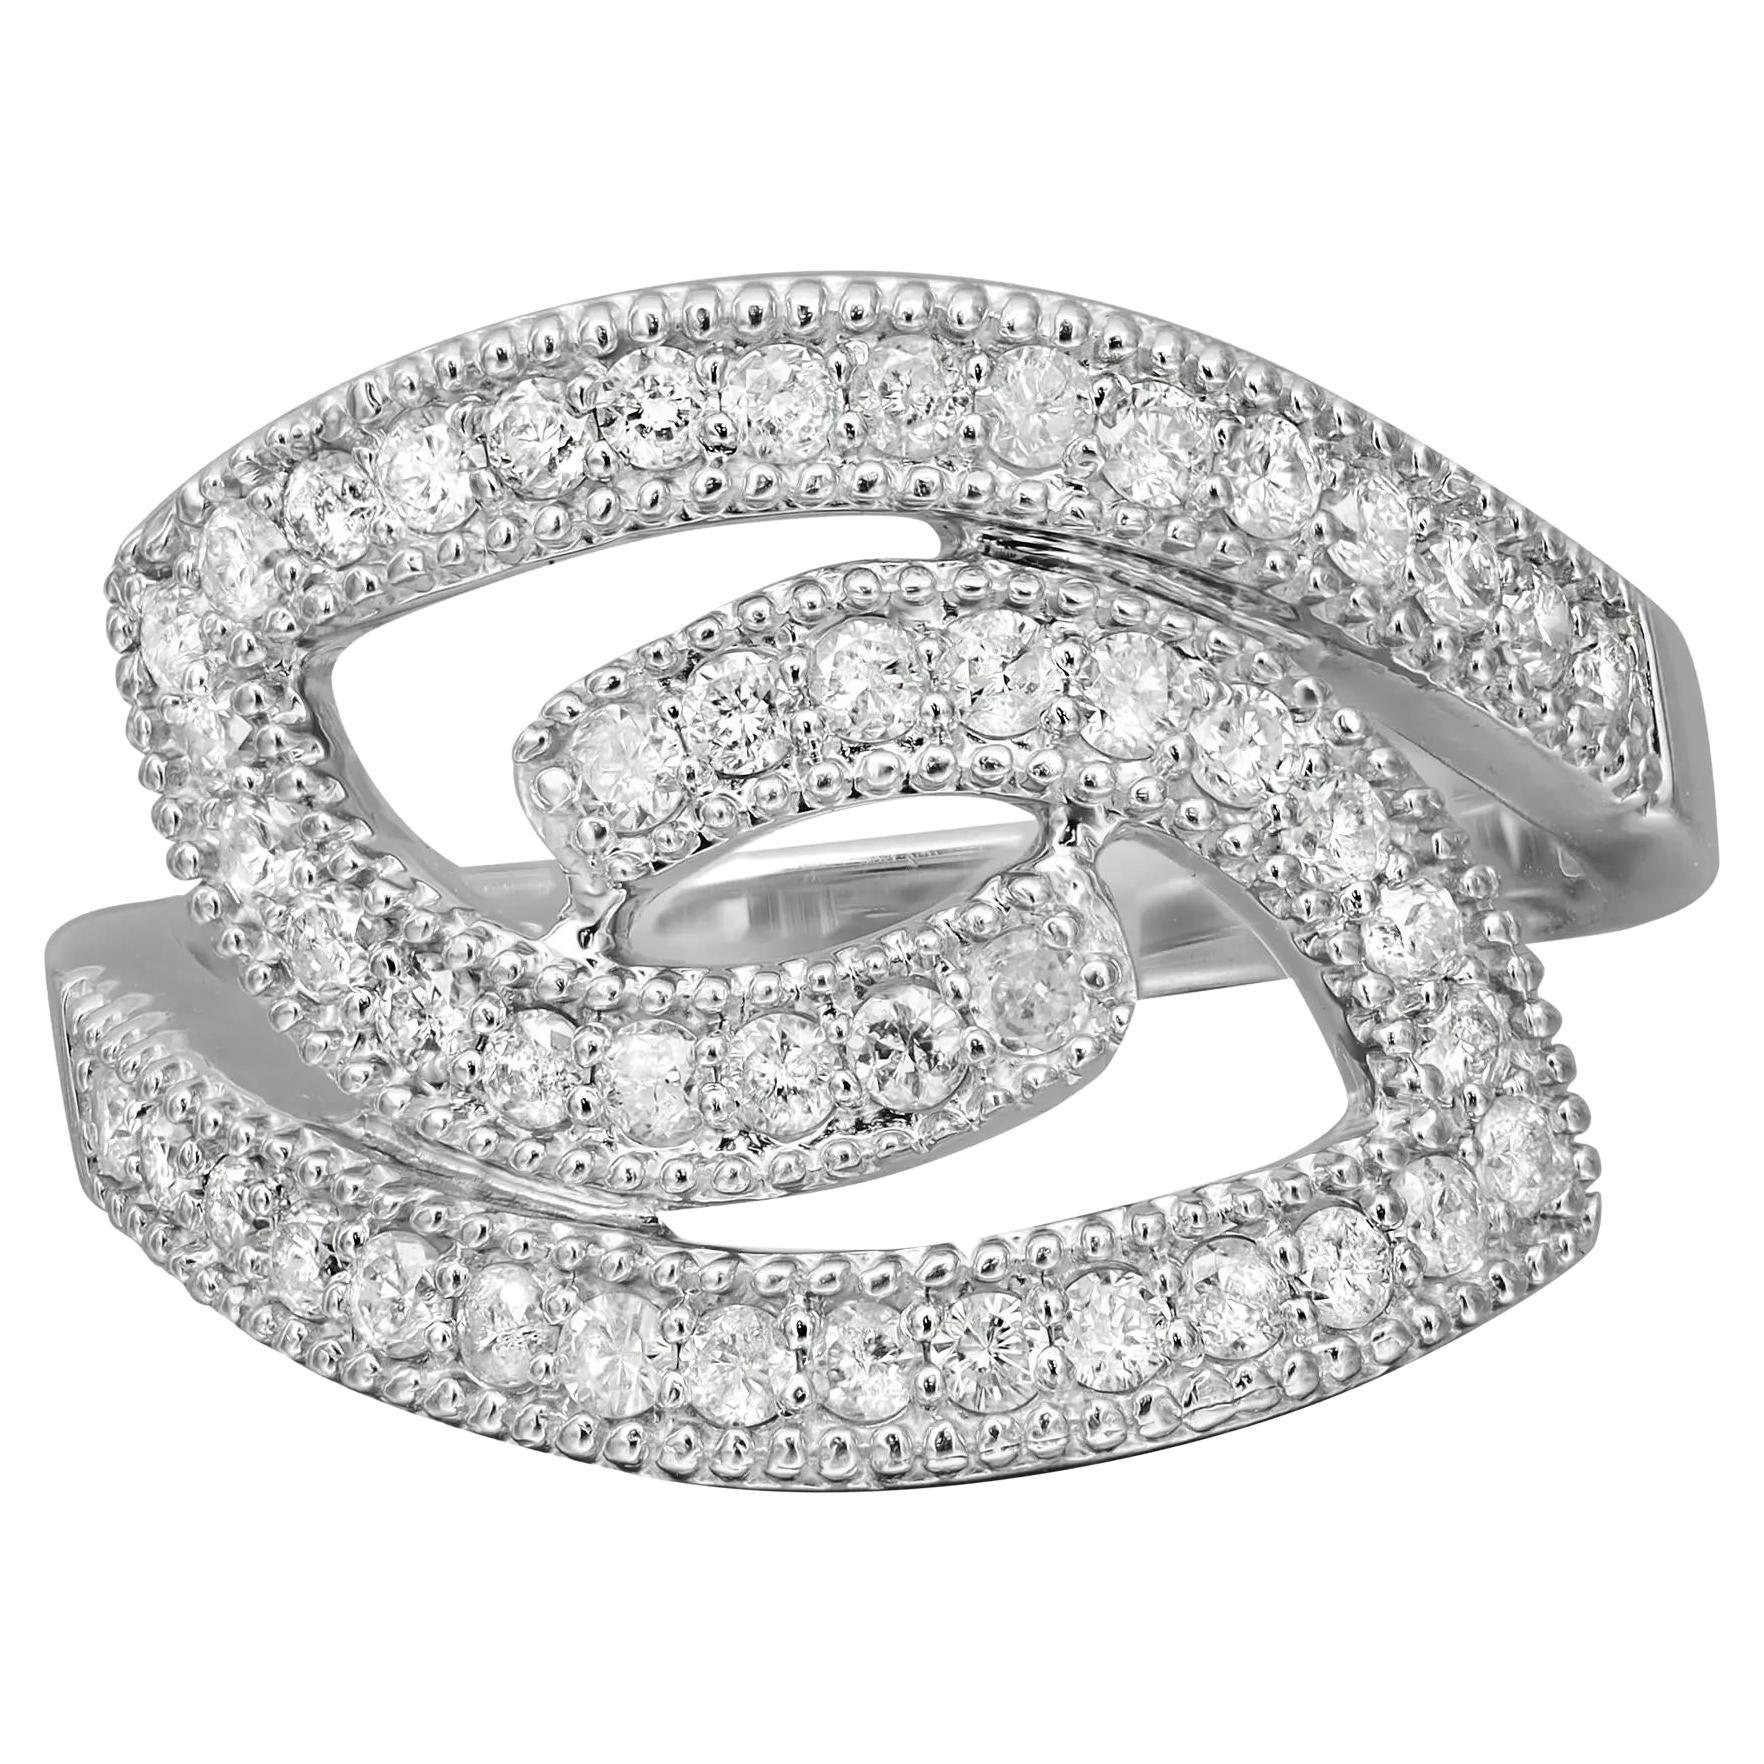 0.74cttw Pave Set Round Cut Diamond Ladies Cocktail Ring 14k White Gold For Sale